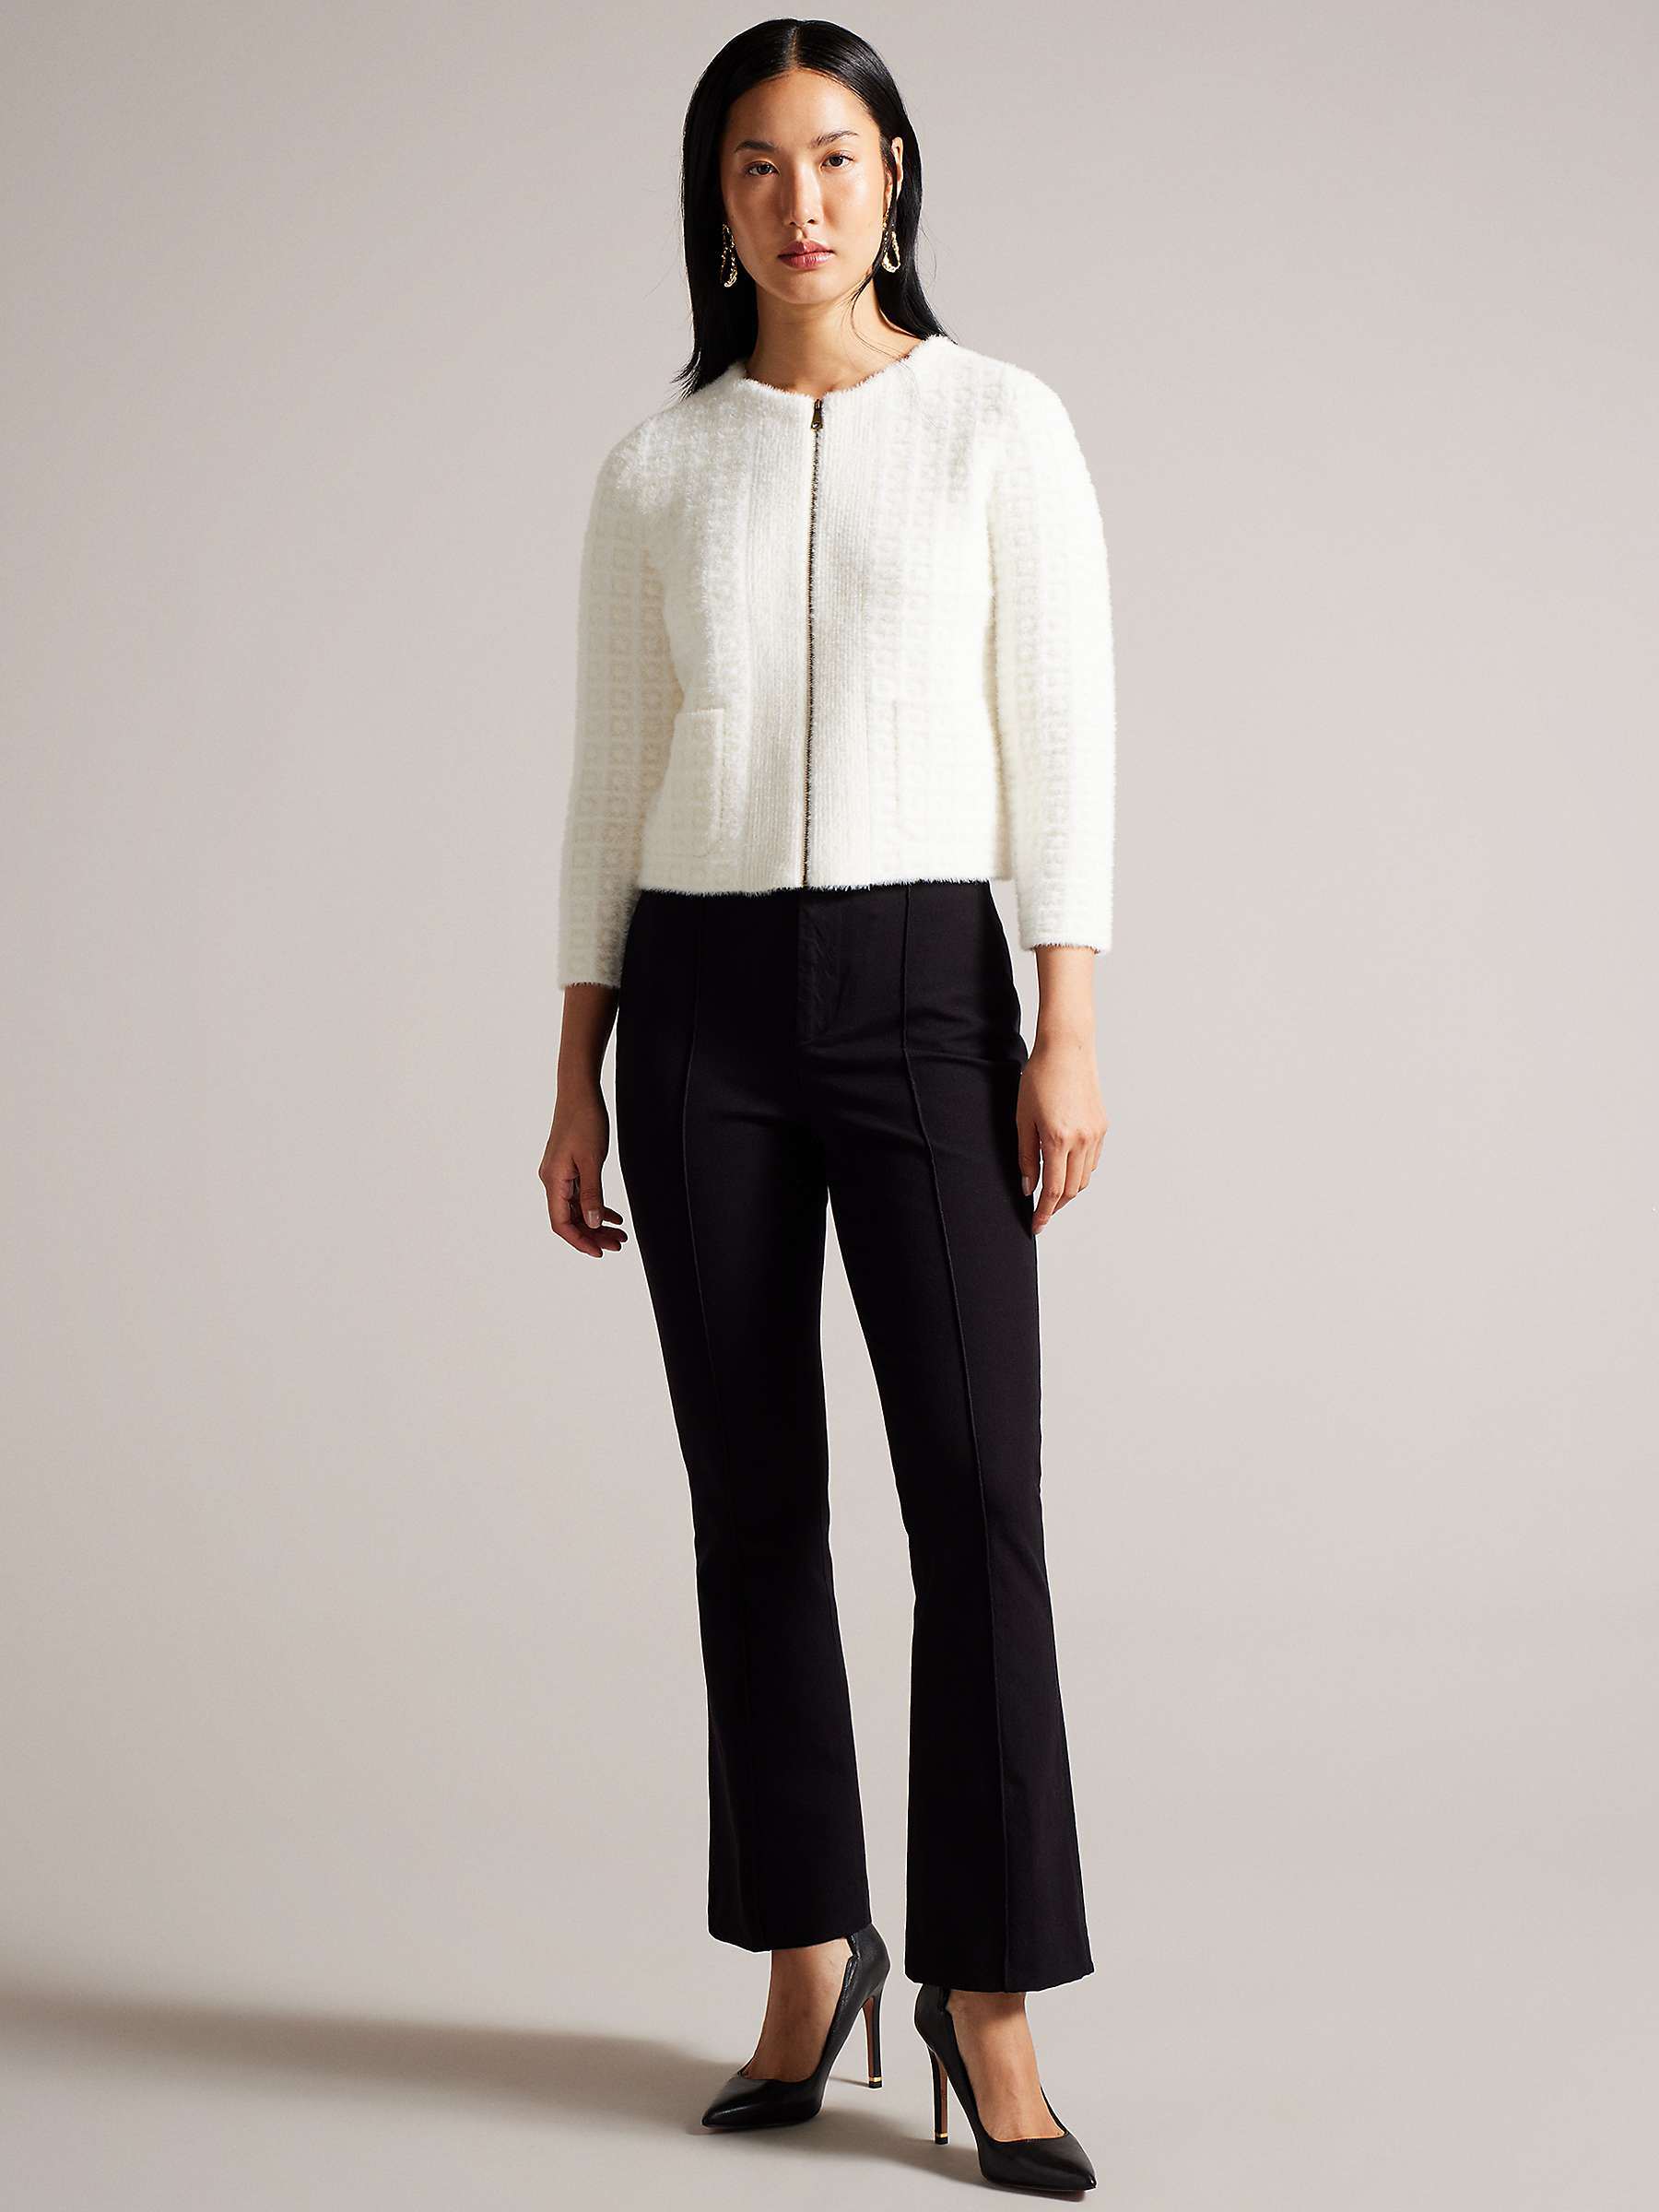 Buy Ted Baker Belenah High Waisted Slim Fit Kick Flare Trousers, Black Online at johnlewis.com